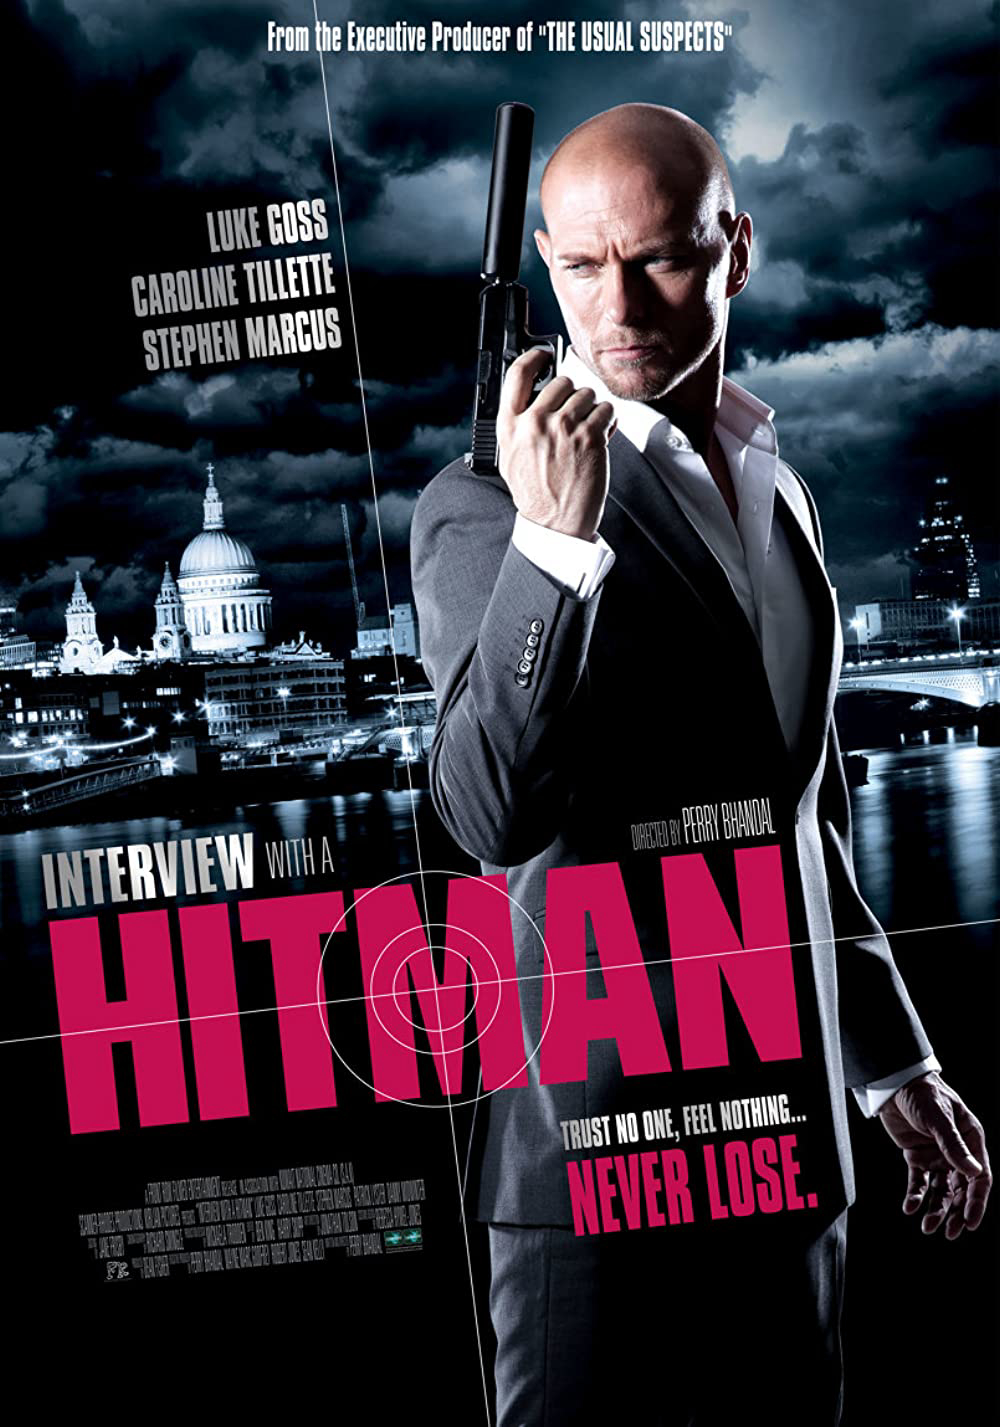 Poster Phim Phỏng Vấn Sát Thủ (Interview with a Hitman)